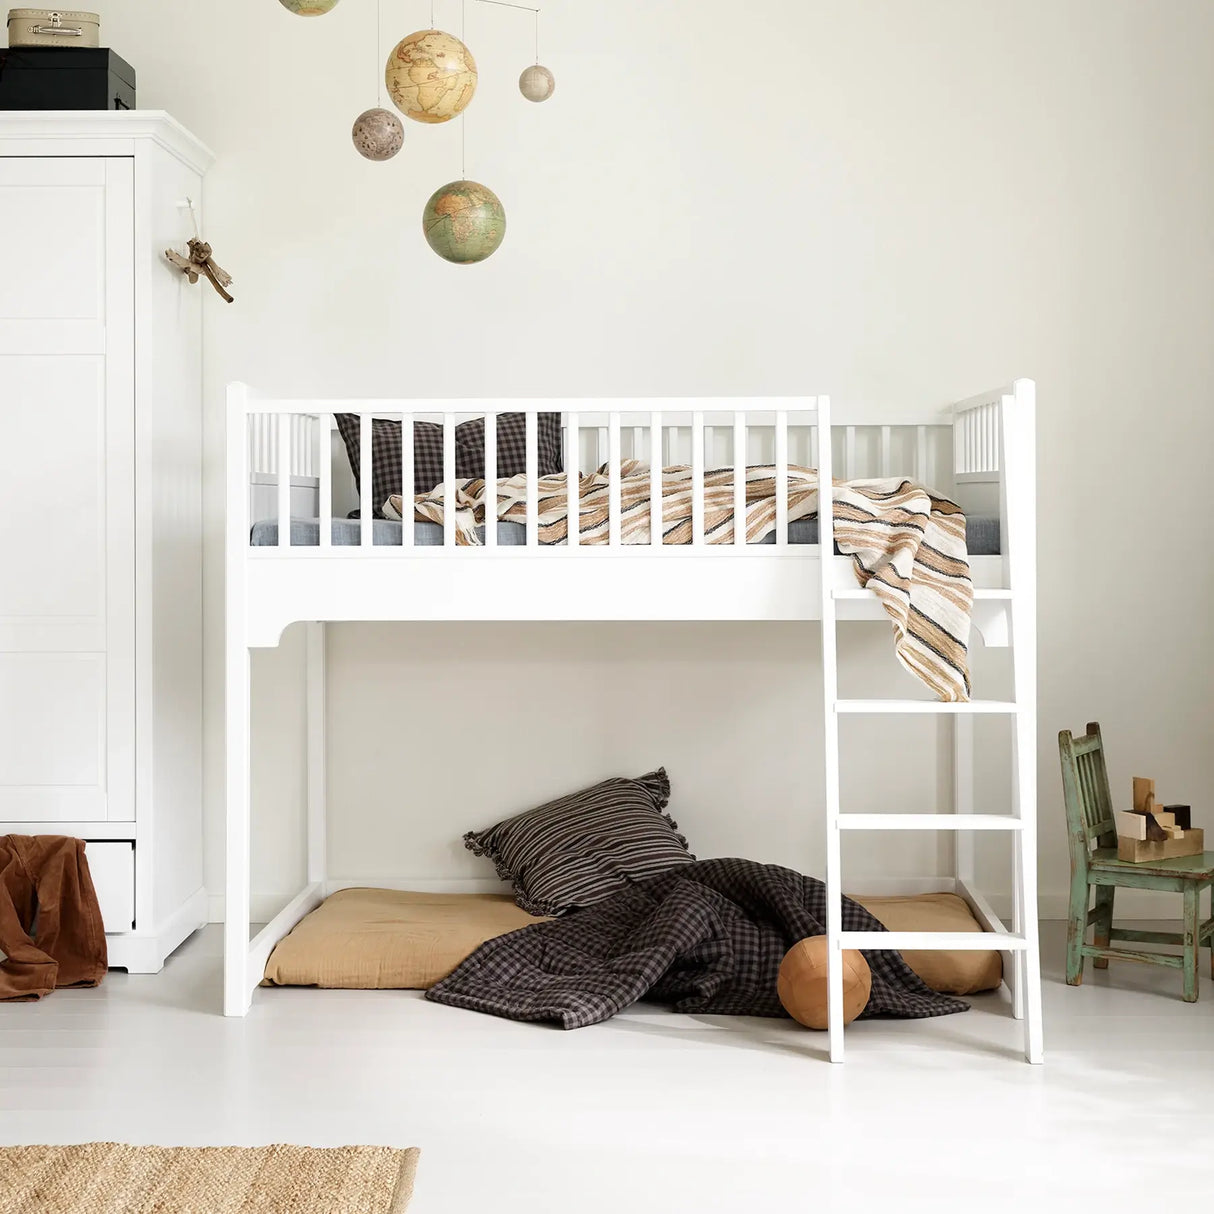 FREE Installation - Oliver Furniture Seaside Classic Junior Low Loft Bed - Little Snoozes